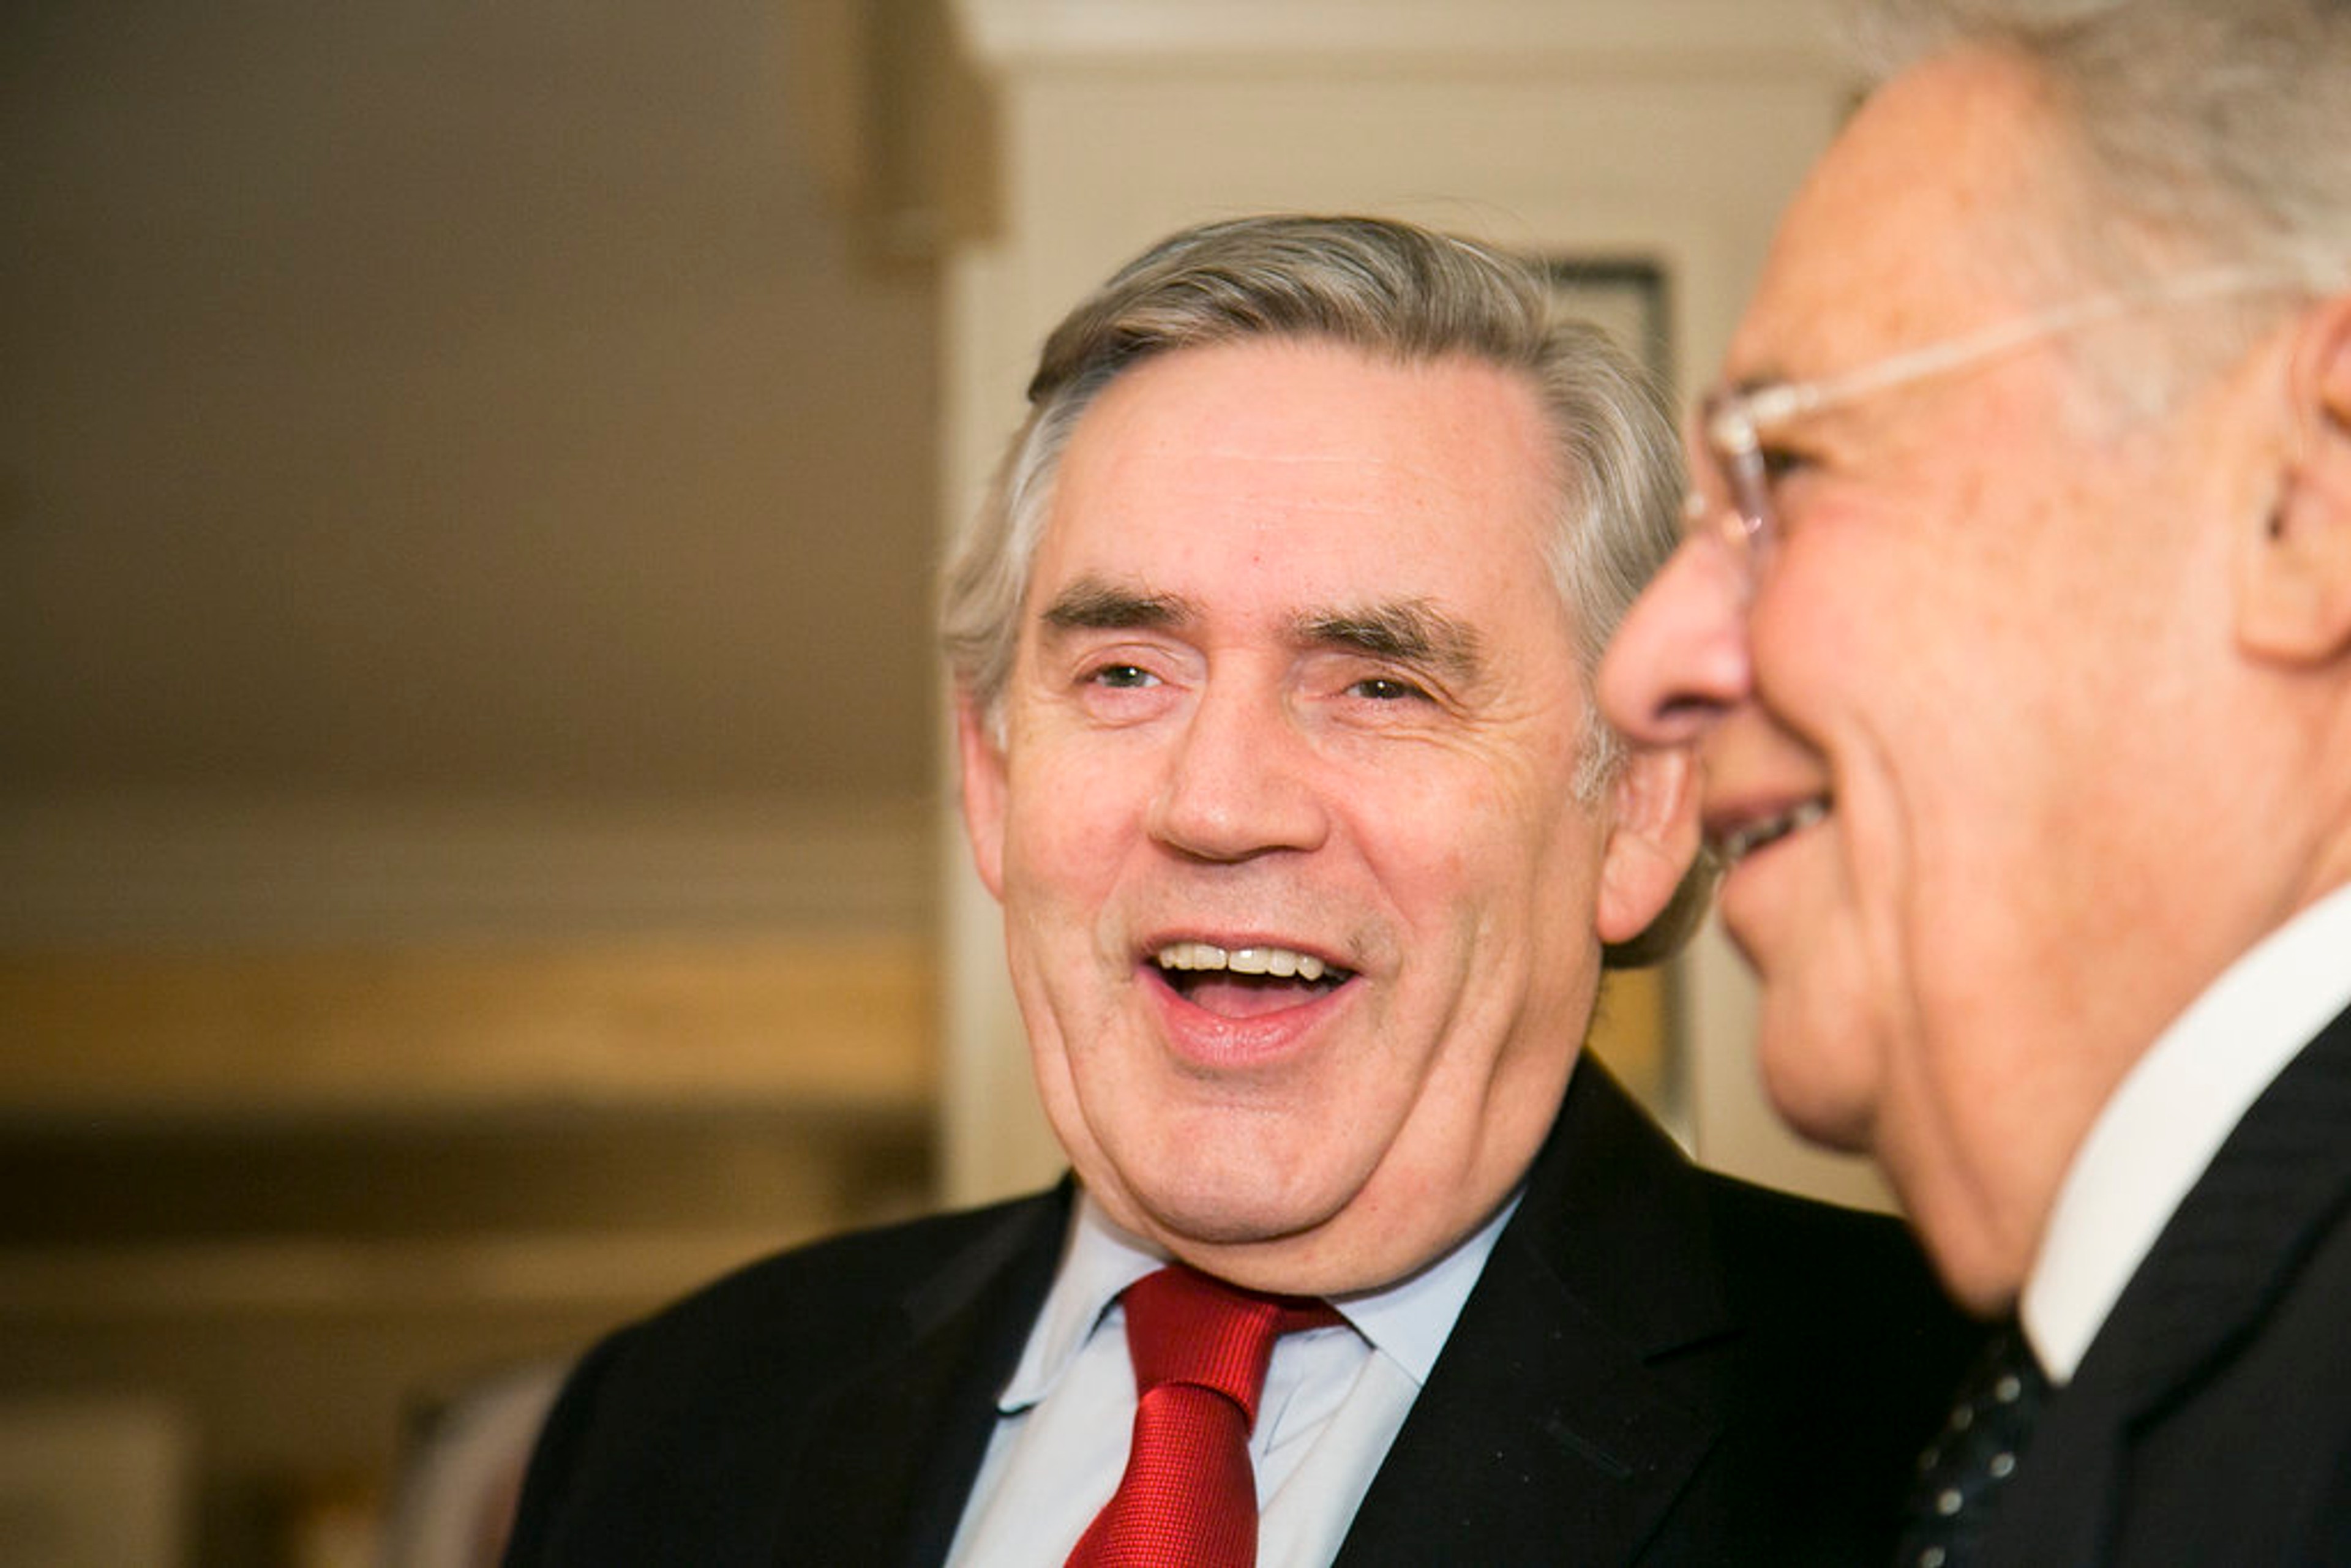 Gordon Brown and Fernando Henrique Cardoso at 21st CC Meeting in New York City